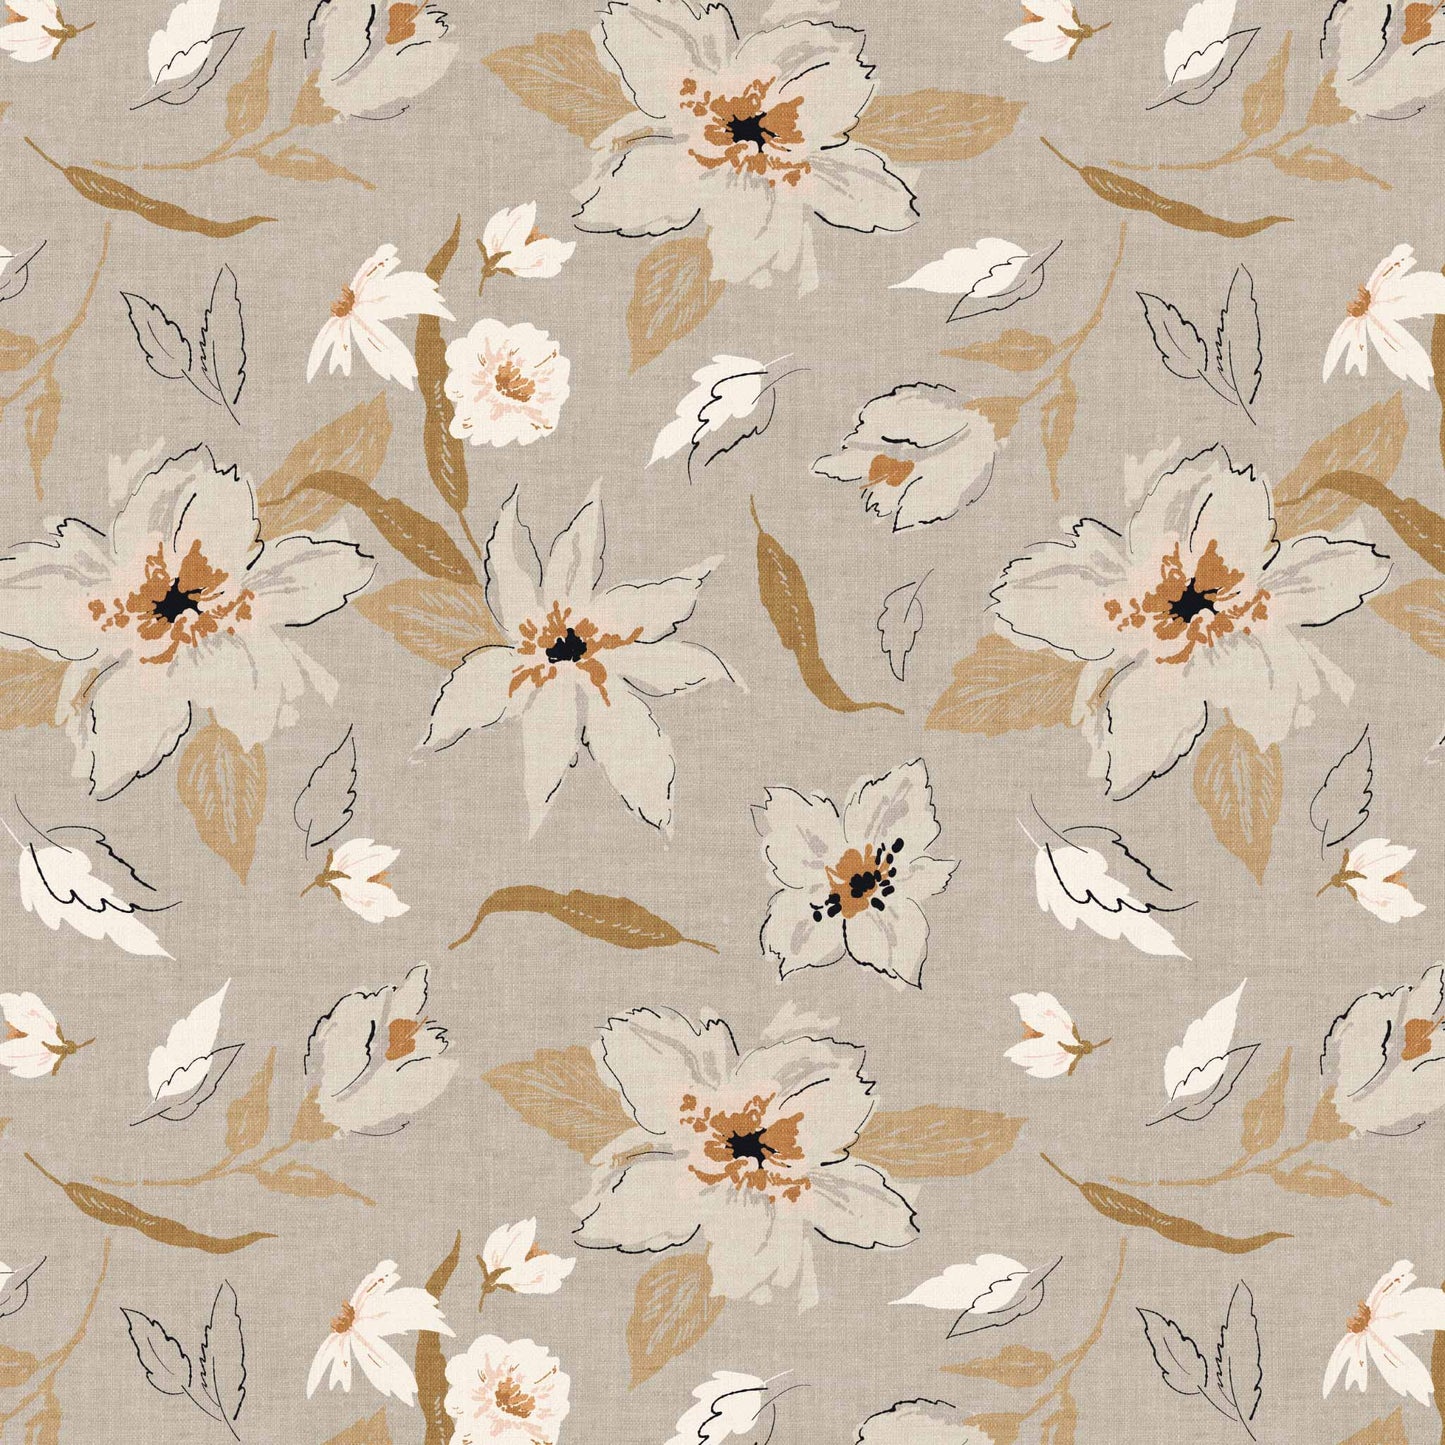 Bring a splash of natural beauty to your walls with this stunning Freehand Florals Wallpaper. Its vibrant dove gray tones and gorgeously done flowers.